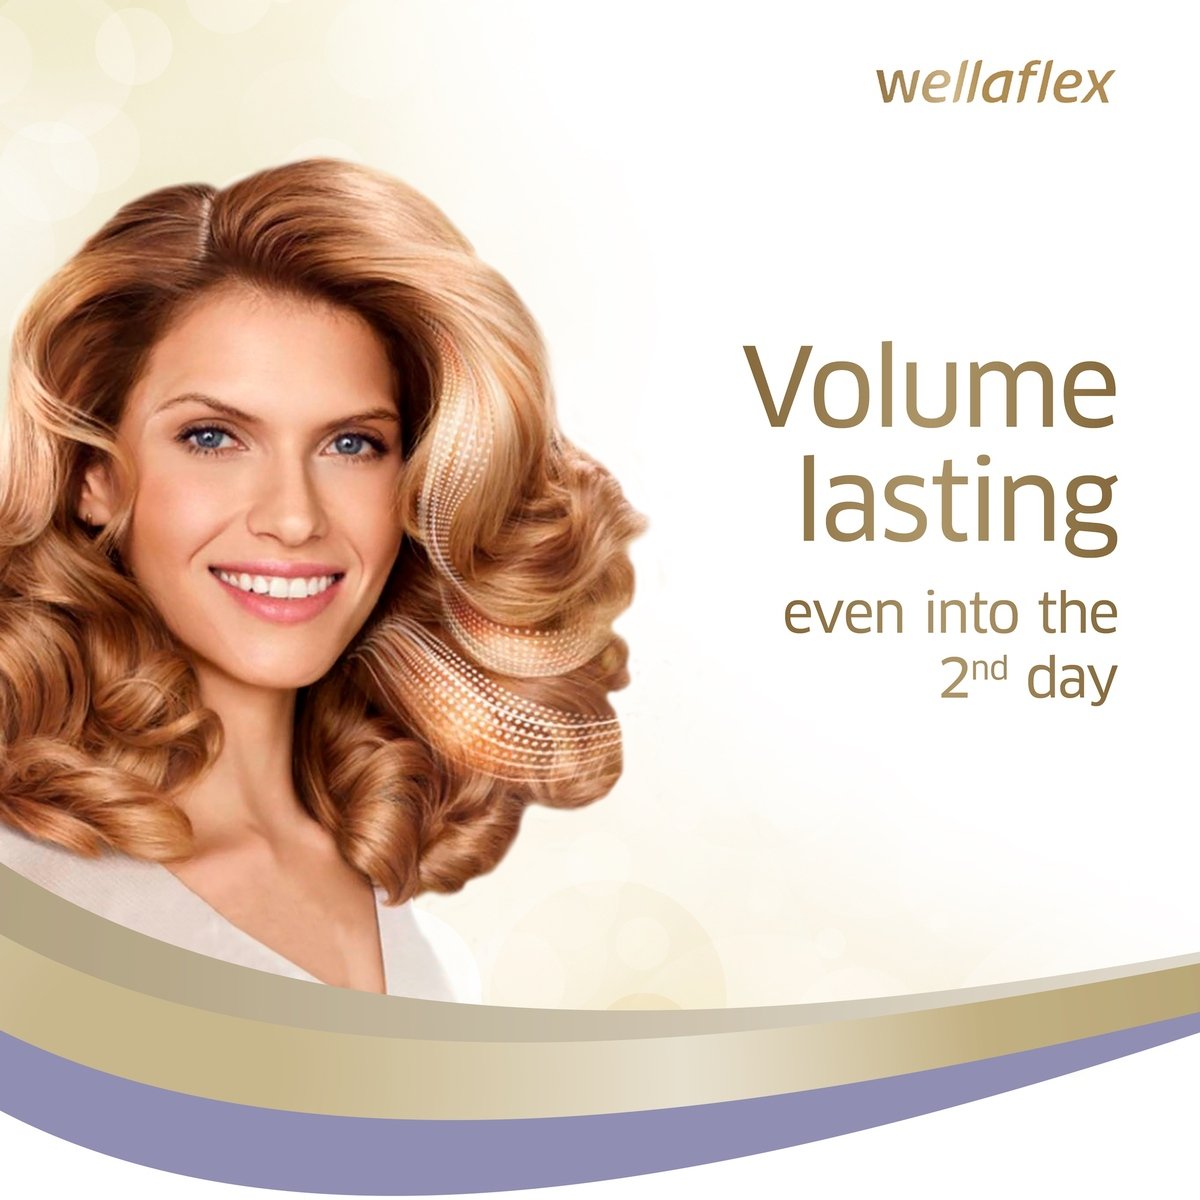 Wella Wellaflex Extra Strong Hold Mousse 200 ml